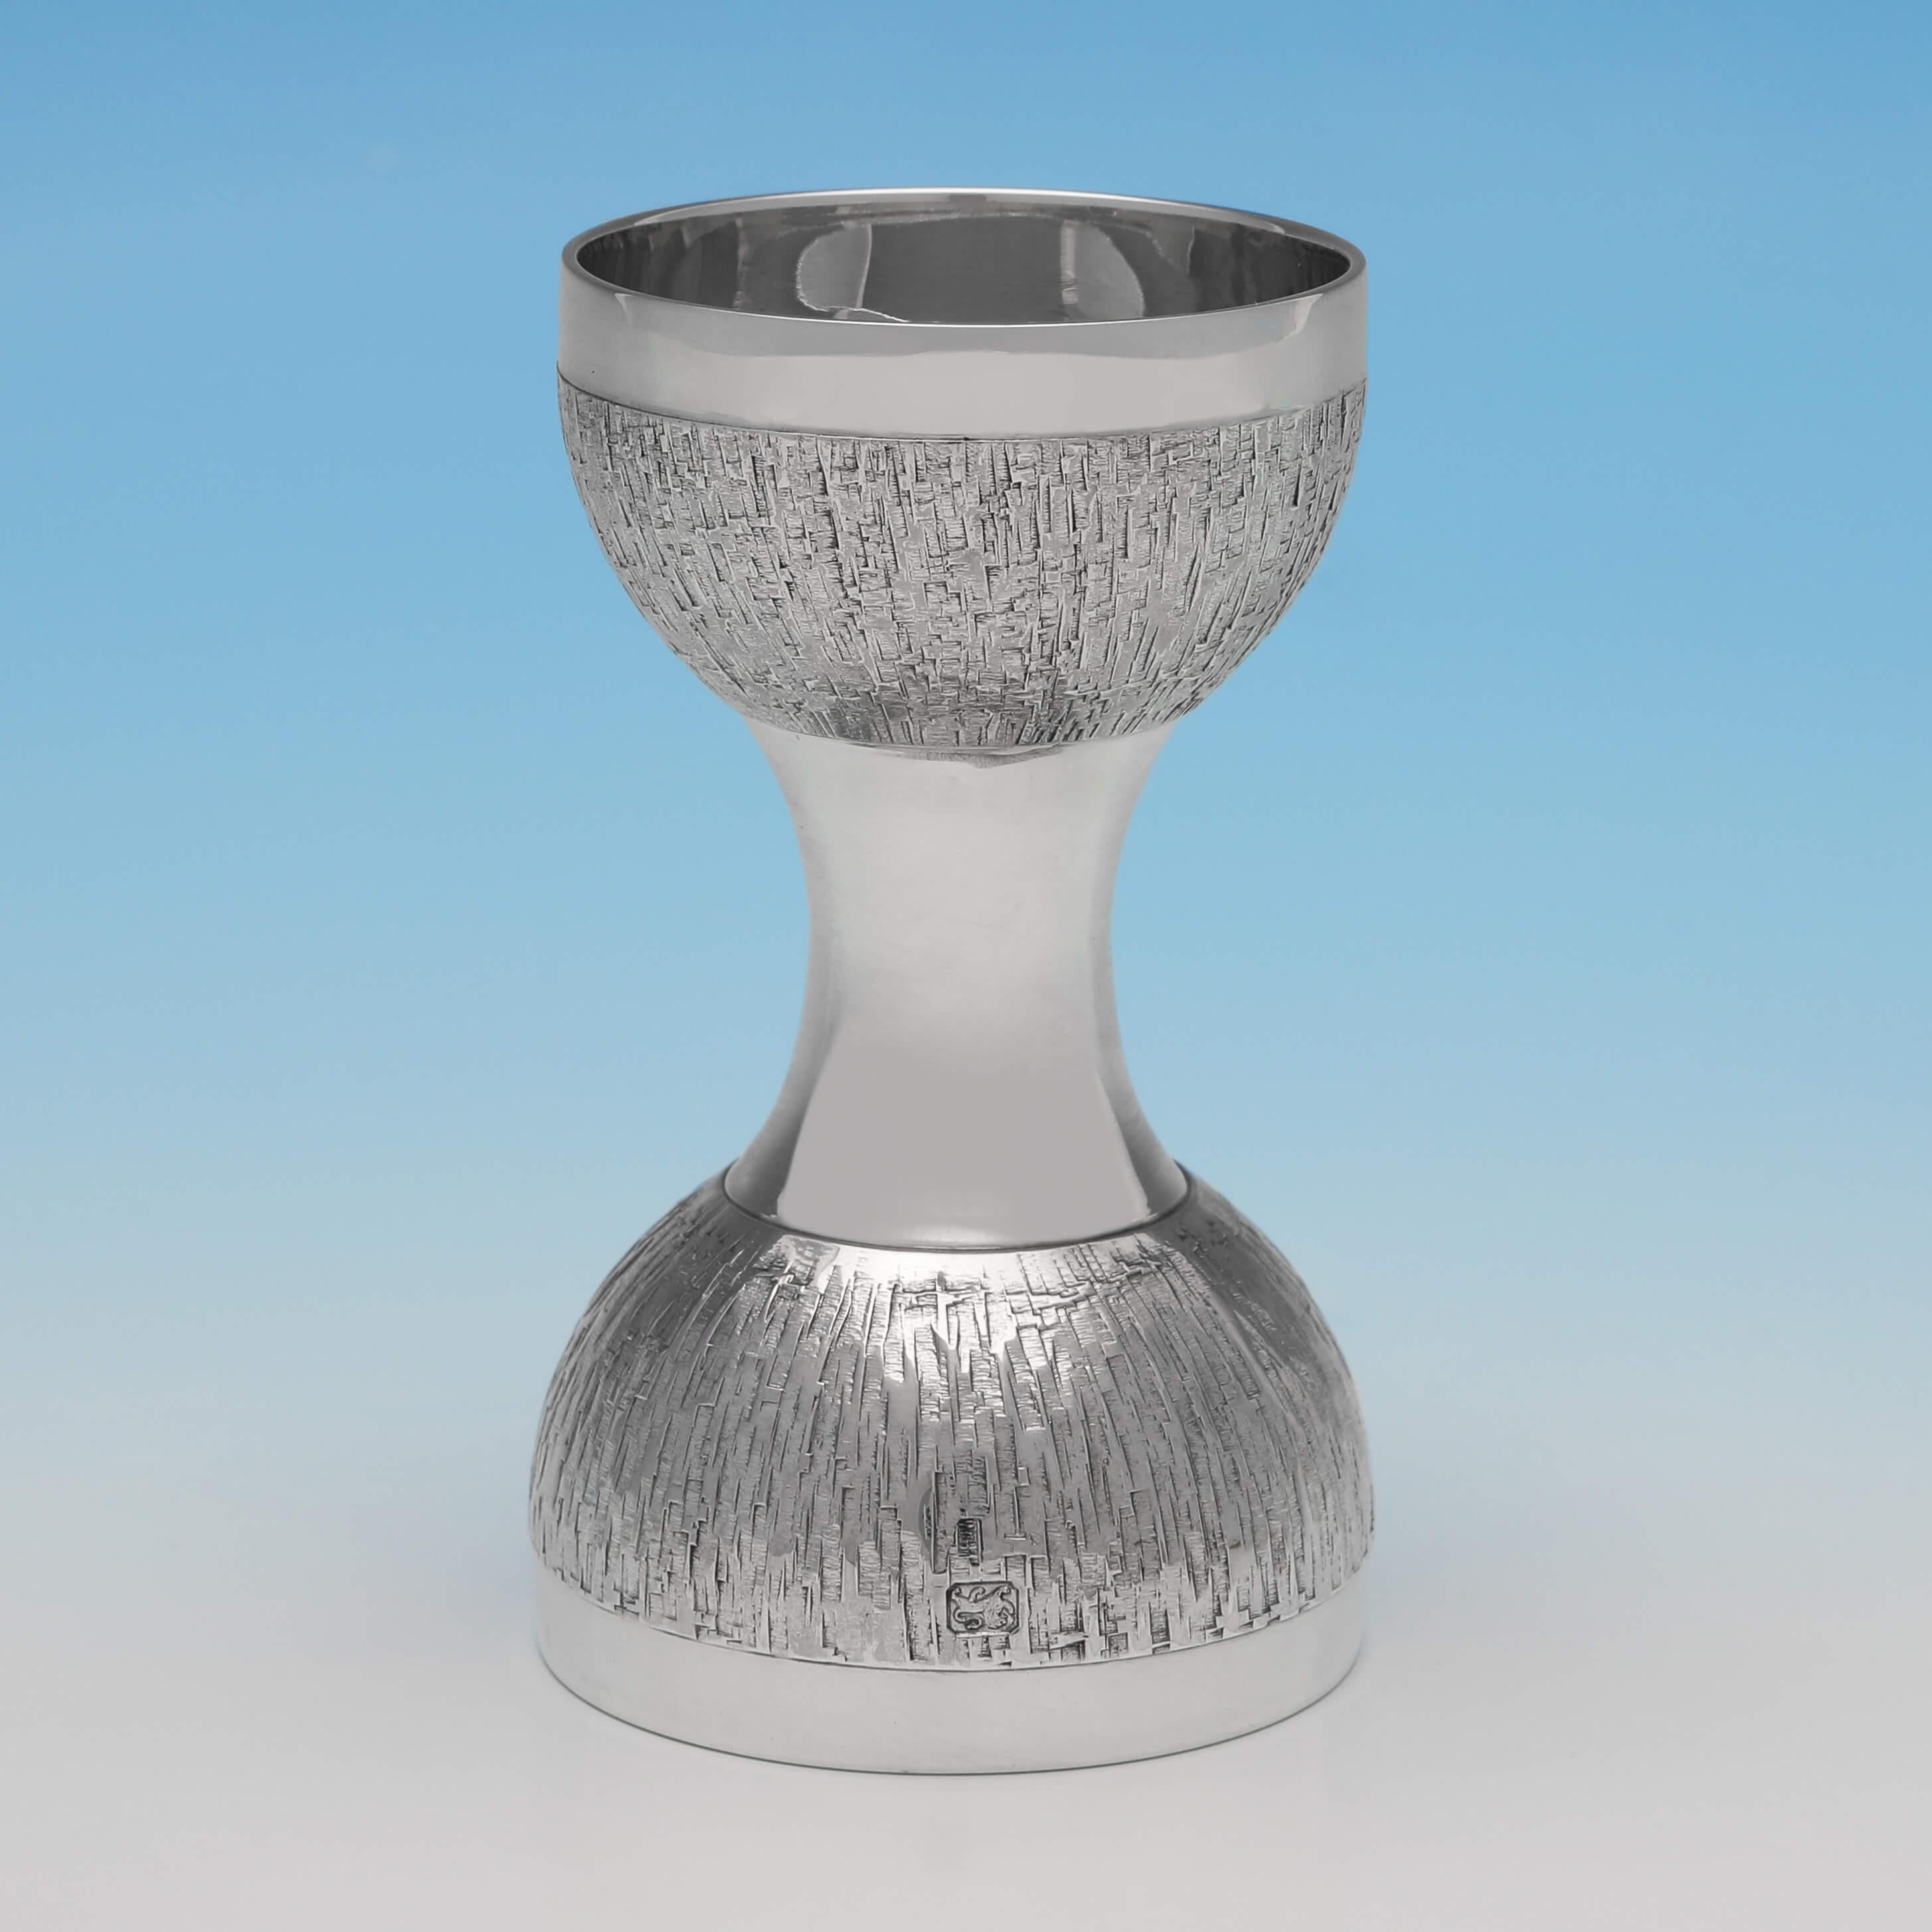 Hallmarked in London in 1971 by C. J. Vander, and designed by Christopher Lawrence, this handsome, Mid-Century Modern Sterling Silver Spirit Measure, is double sided for single and double measures, and features a bark effect finish. The spirit